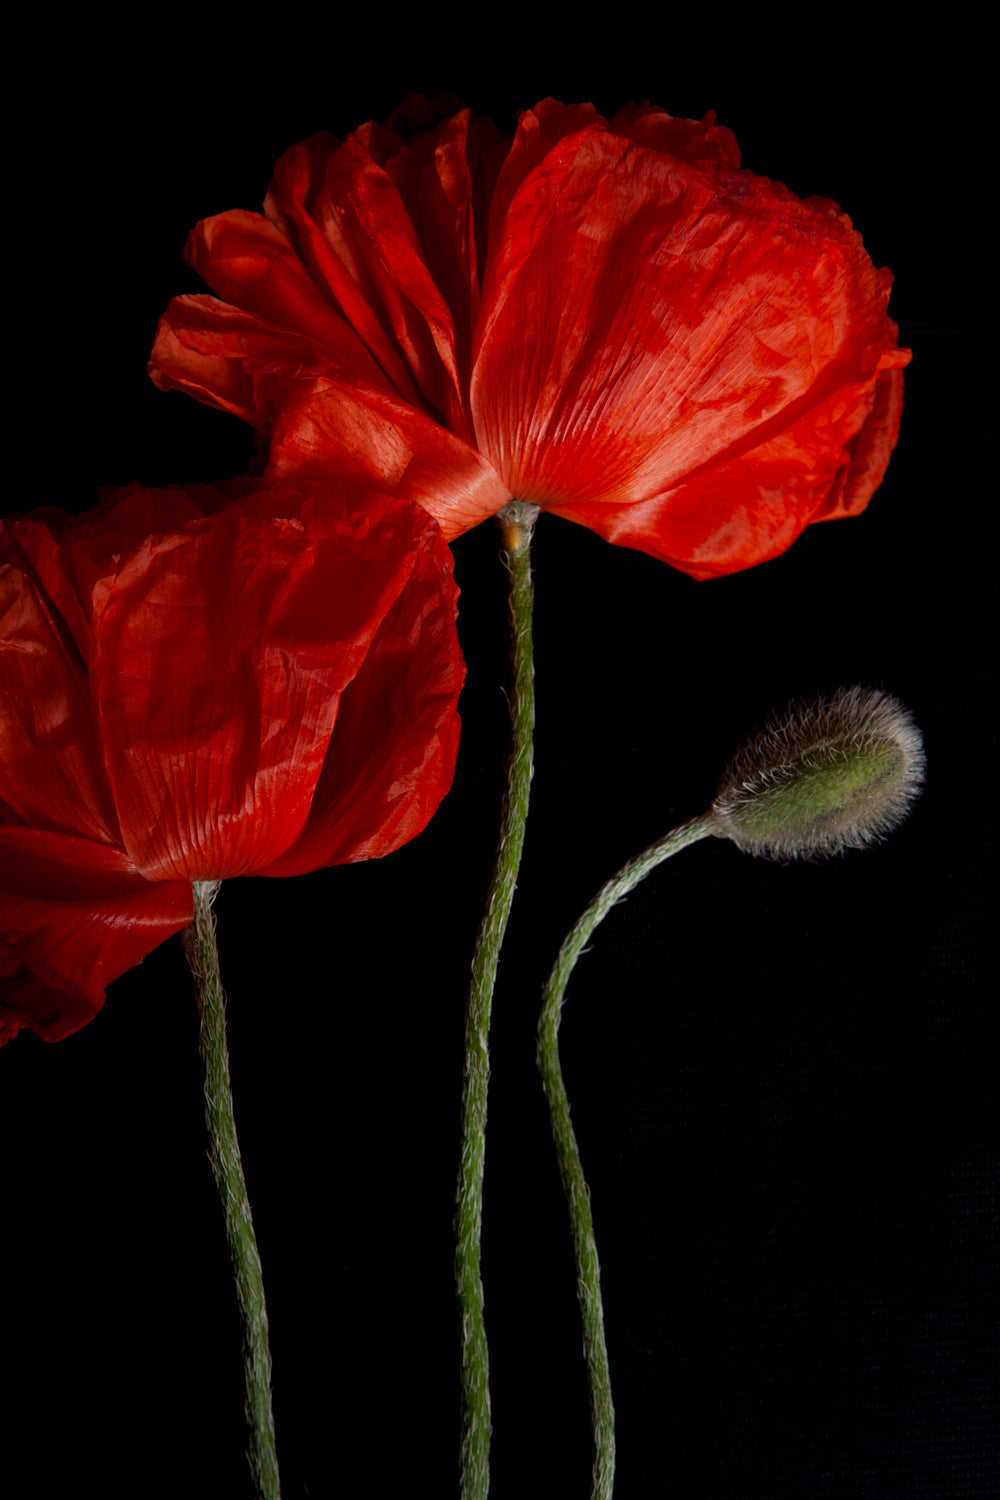 a photo of 3 poppies laying flat on a black background. One large fully bloomed red poppy in the middle with floppy leaves. To the right of it, a poppy bud in it's green shell with fuzzy hairs on it. To the left of the large red poppy in the middle is another fully bloomed poppy and it sits slightly lower but just labor the height of the bud.